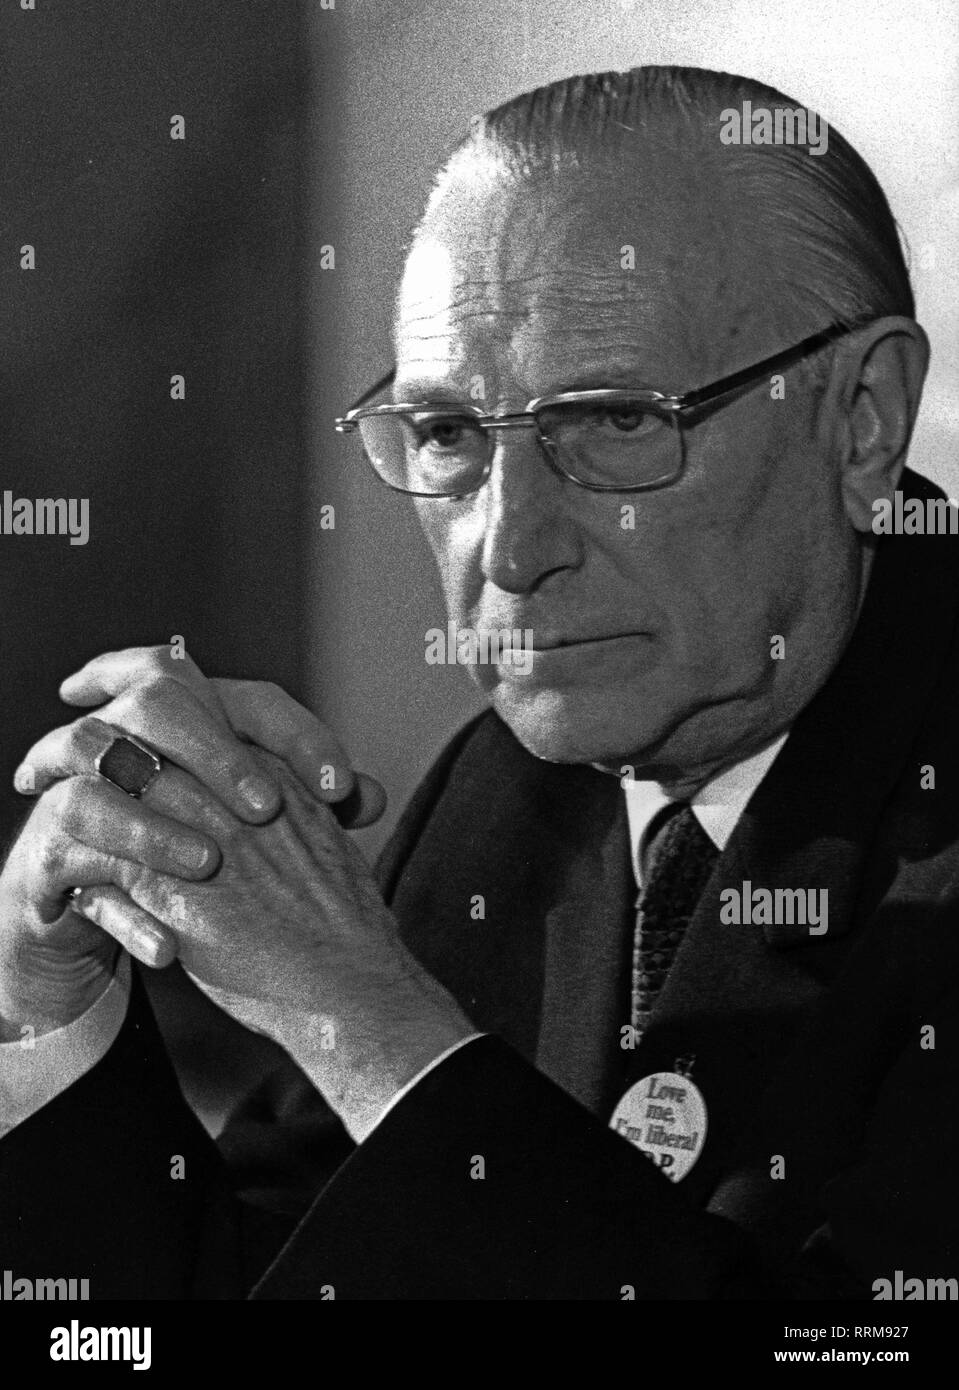 Borm, William, 7.7.1895 - 2.9.1987, German businessman and politician (FDP), member of the FDP federal executive council 1960 - 1982, portrait, Berlin 25.2.1971, Additional-Rights-Clearance-Info-Not-Available Stock Photo